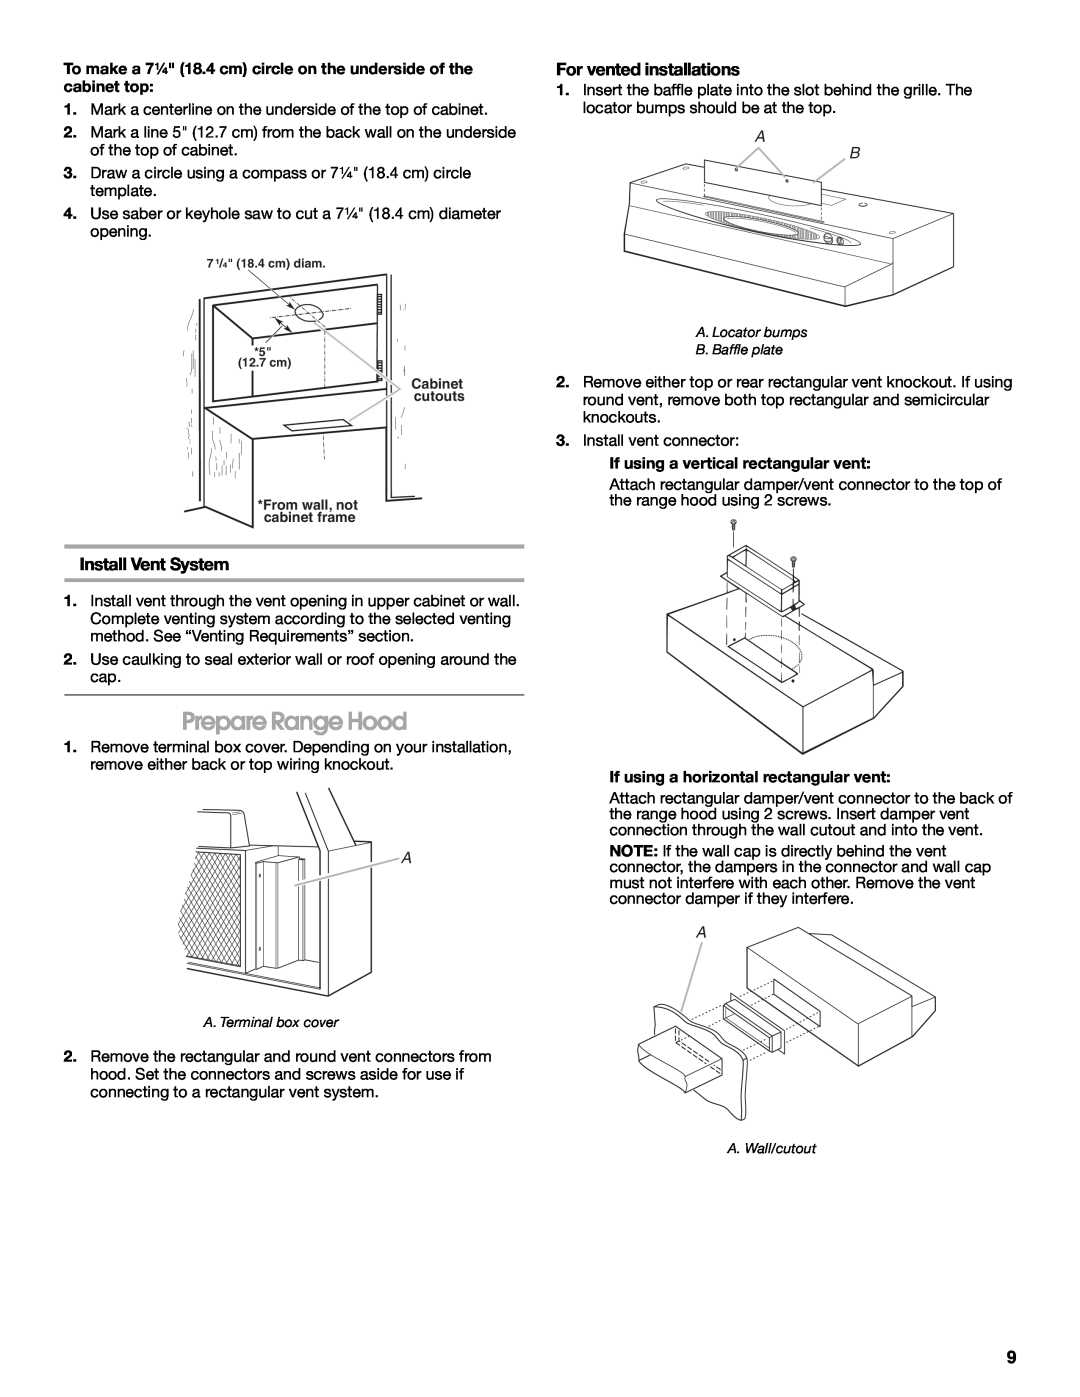 Whirlpool 99044505A, W10240580A installation instructions Prepare Range Hood, For vented installations, Install Vent System 